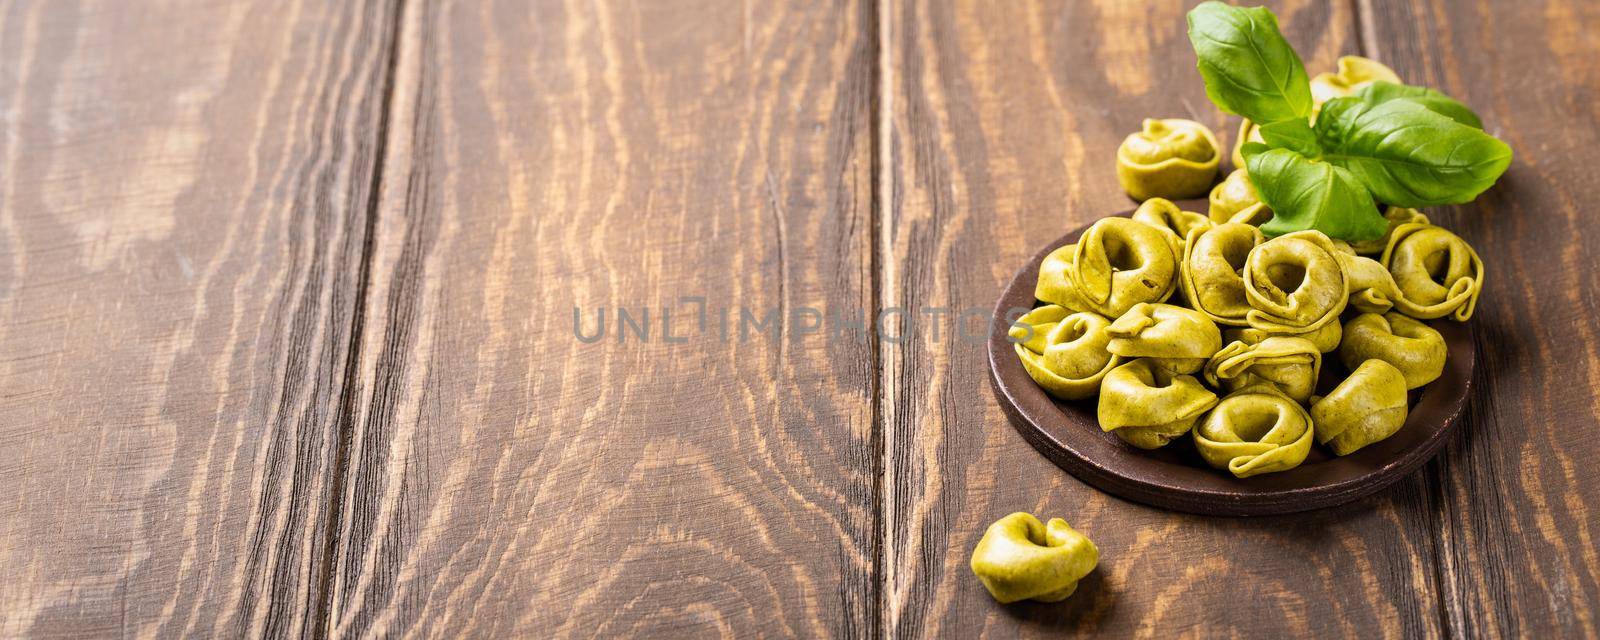 Homemade Tortellini with spinach, cheese and ricotta on wooden board. Healthy italian food concept with copy space. Banner.